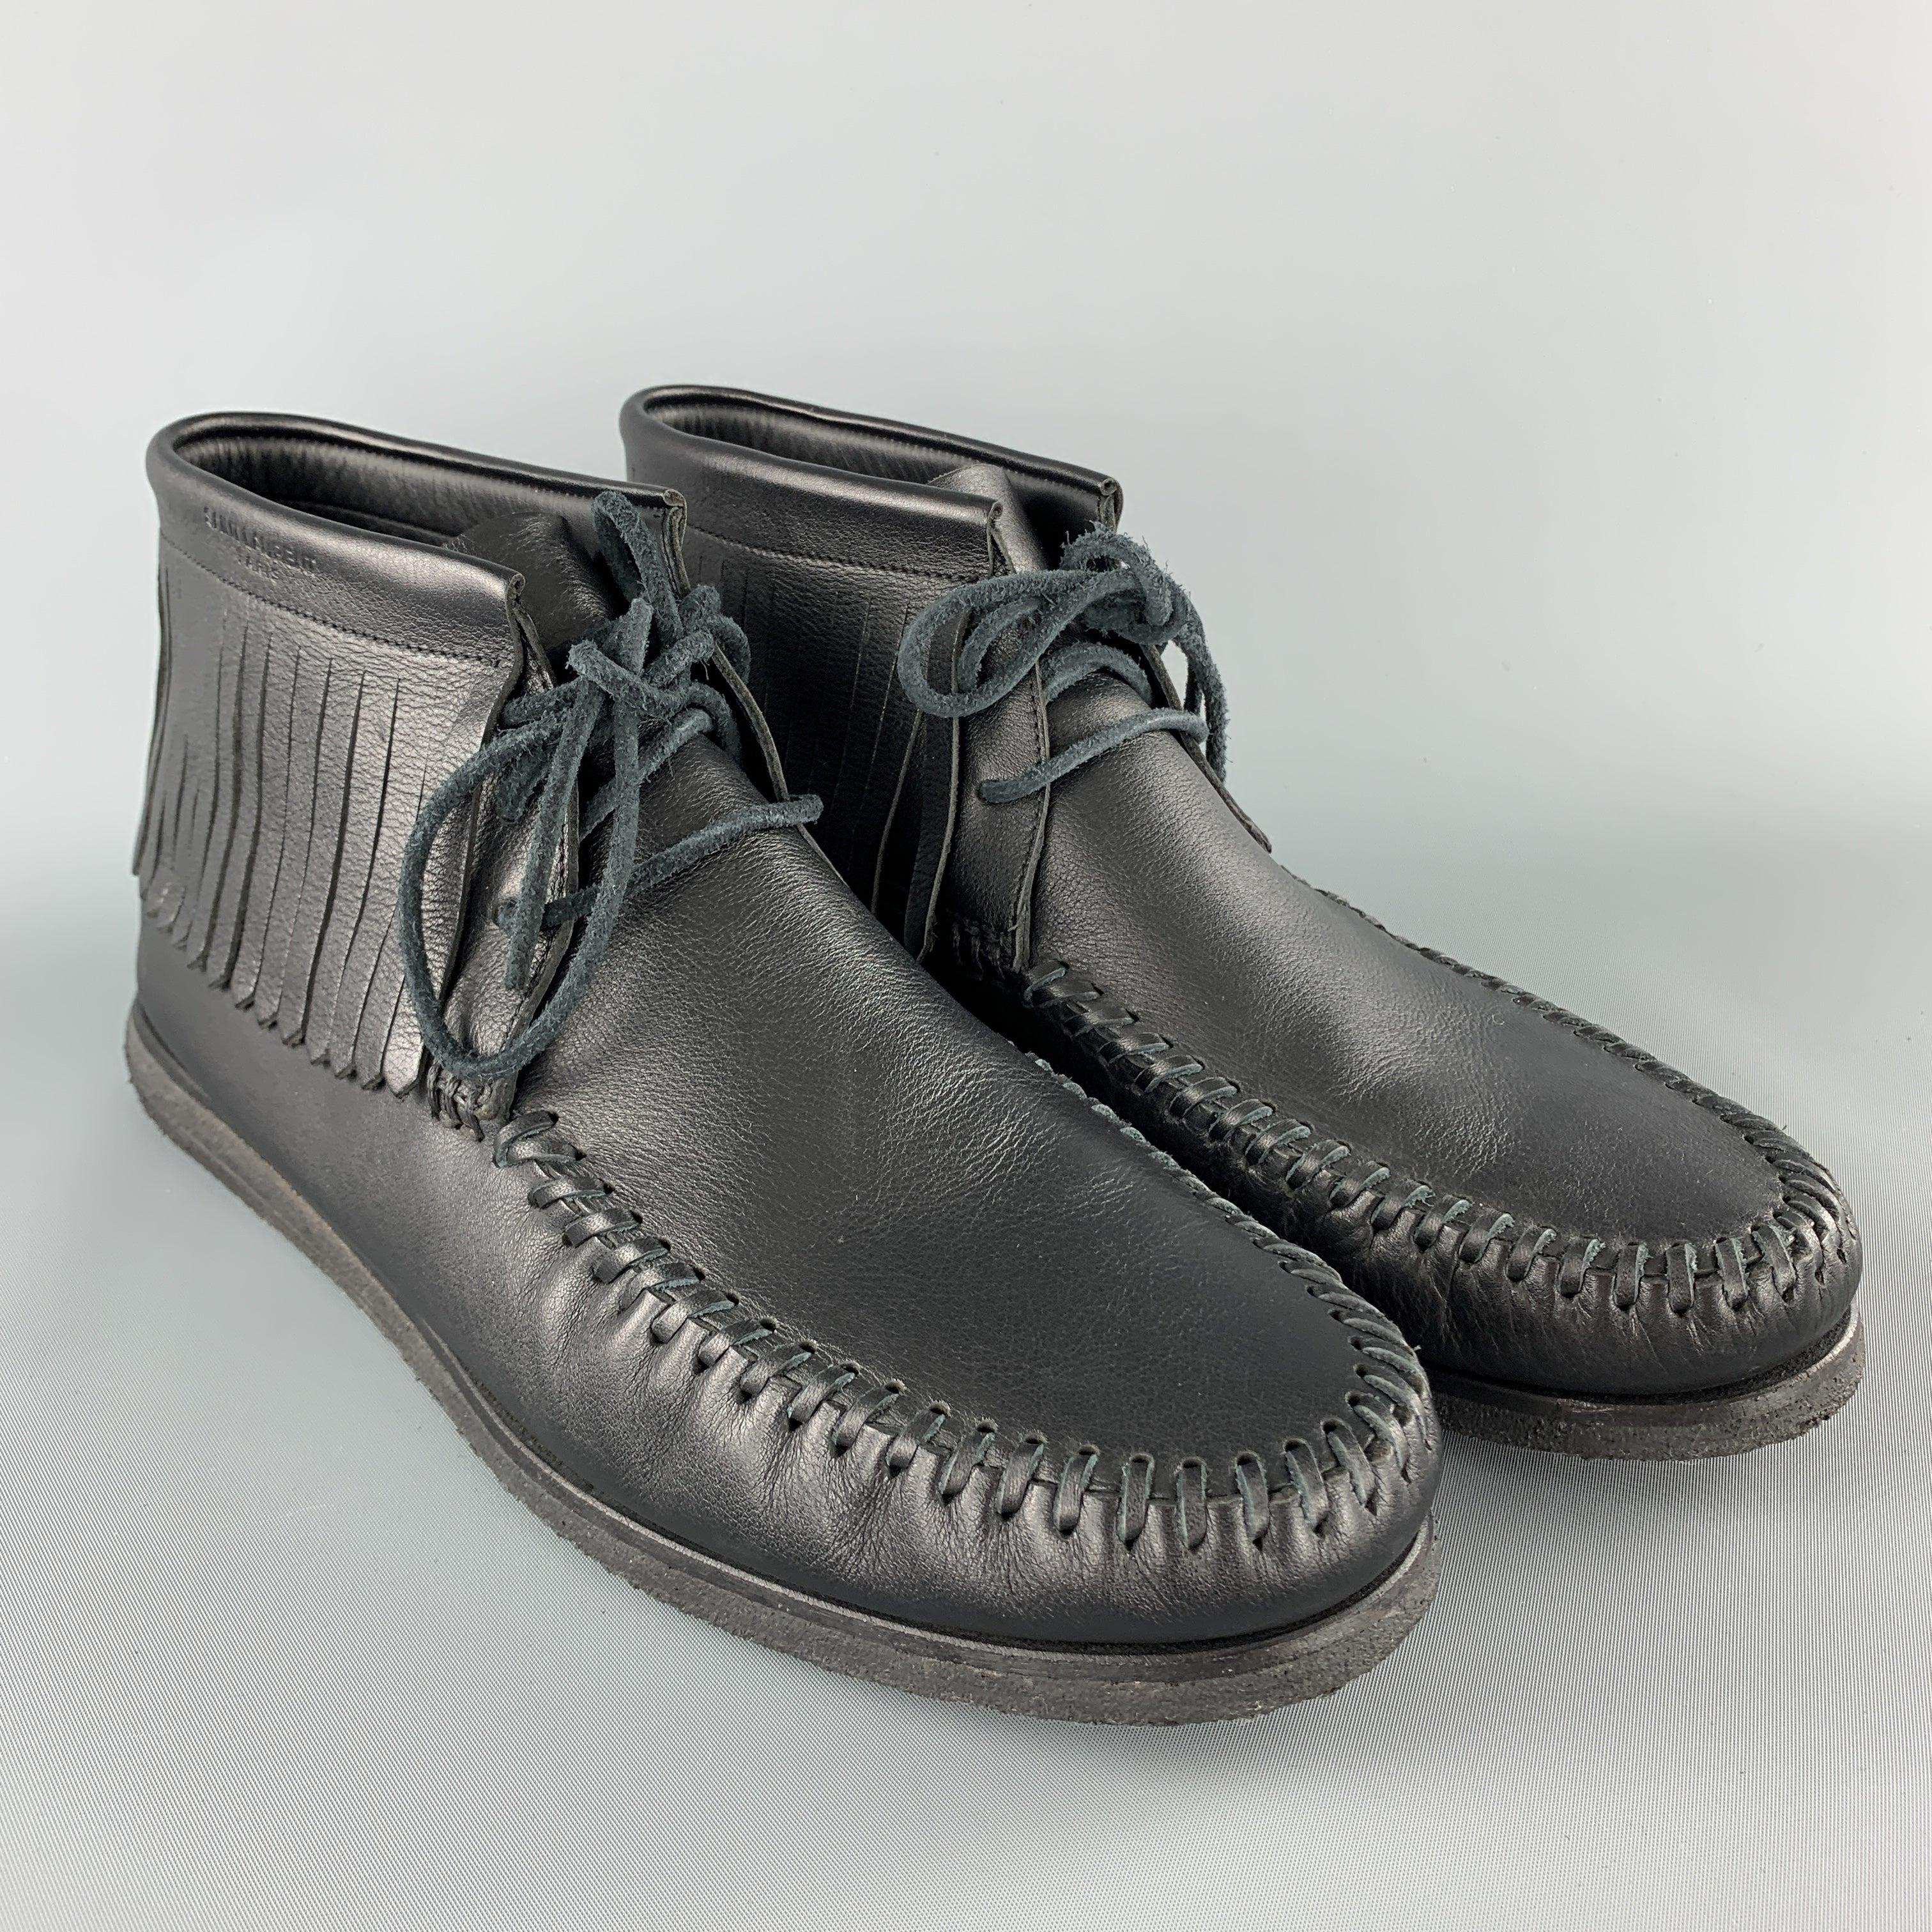 SAINT LAURENT Moccasin inspired sneakers come in smooth black leather with a whipstitch apron toe, suede laces, fringe trim, and crepe sole. With box. Made in Italy.Excellent
Pre-Owned Condition. 

Marked:   IT 45 

Measurements: 
  Outsole: 11.75 x